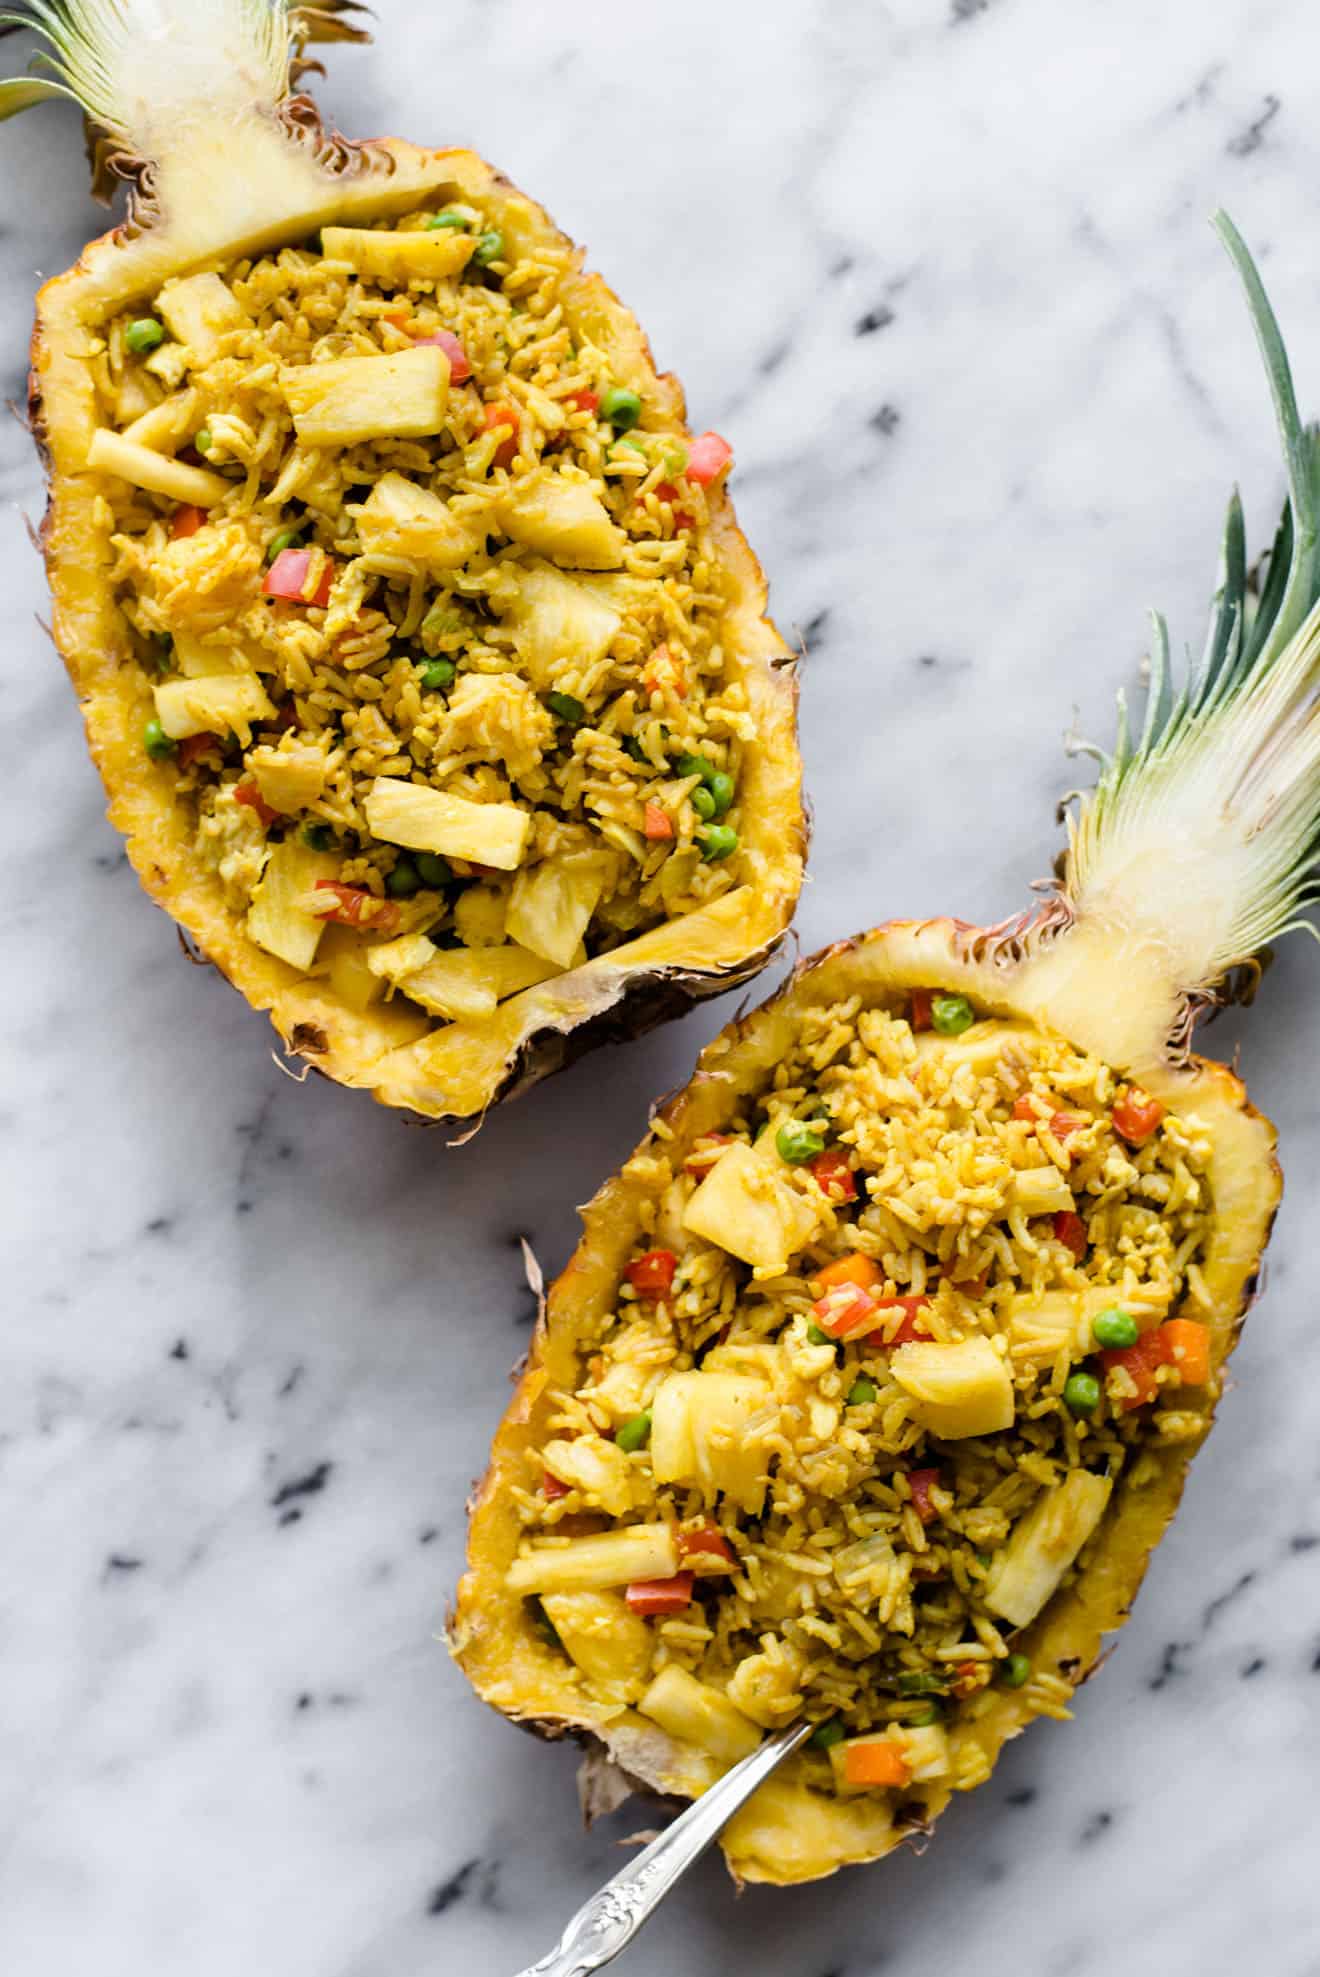 HEALTHY Pineapple Fried Rice: easy dinner ready in 30 minutes! It's seasoned with turmeric, coriander and fresh pineapple!